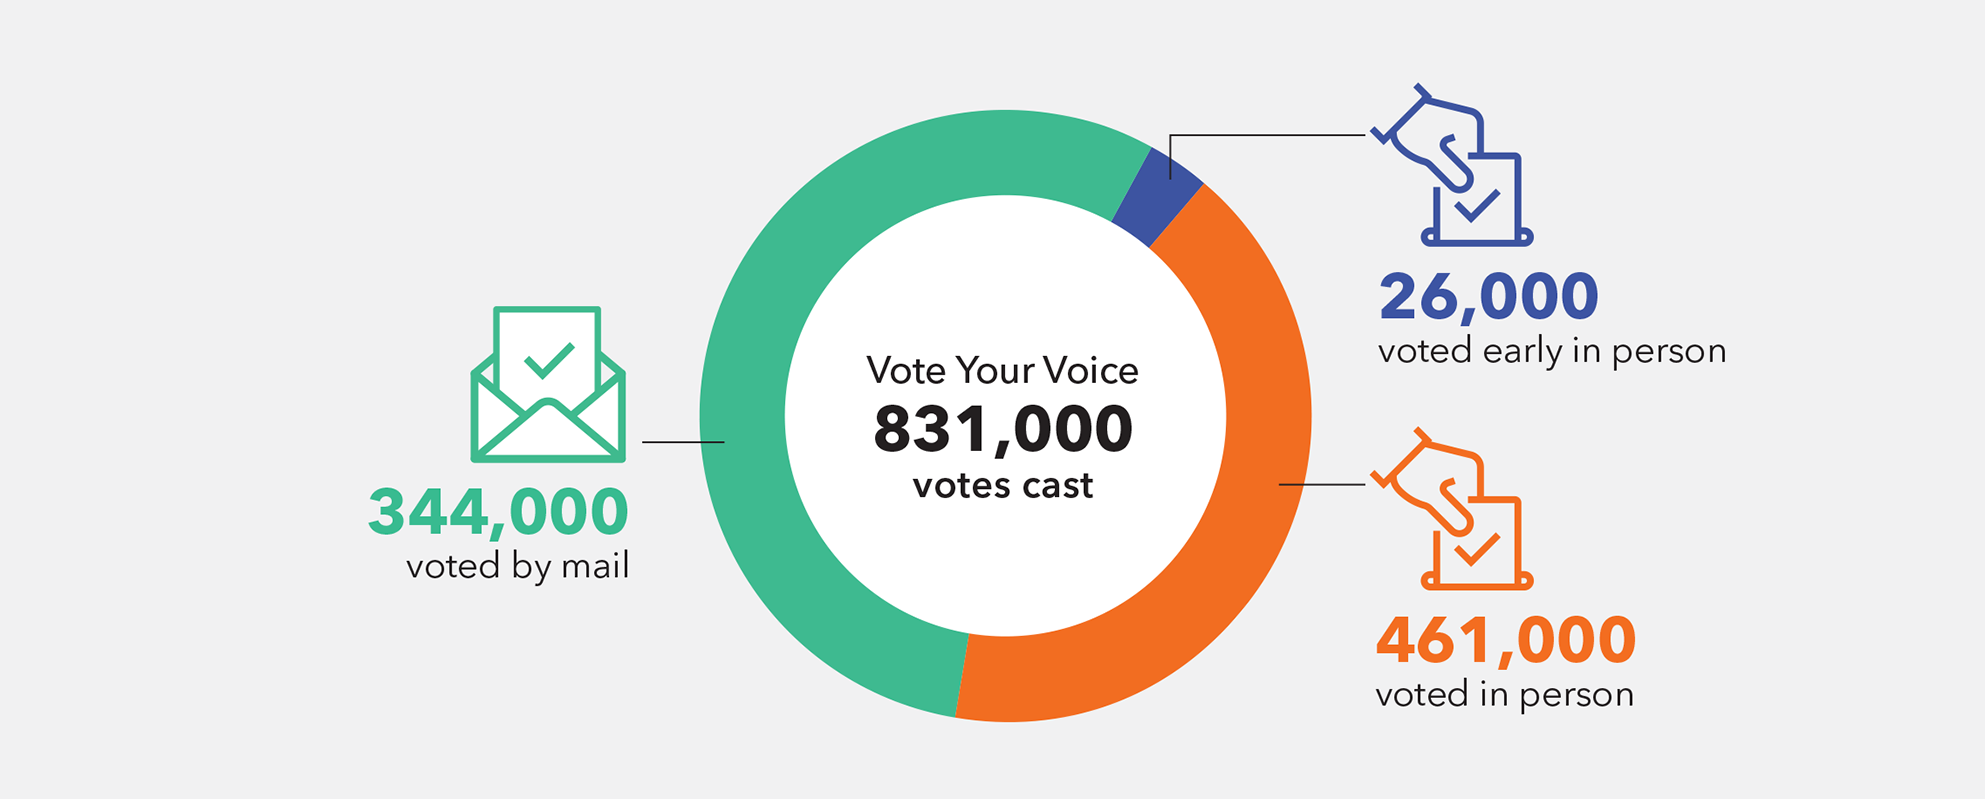 Featured image for “Examples of how your community foundation worked to strengthen our region in 2020: Vote Your Voice”